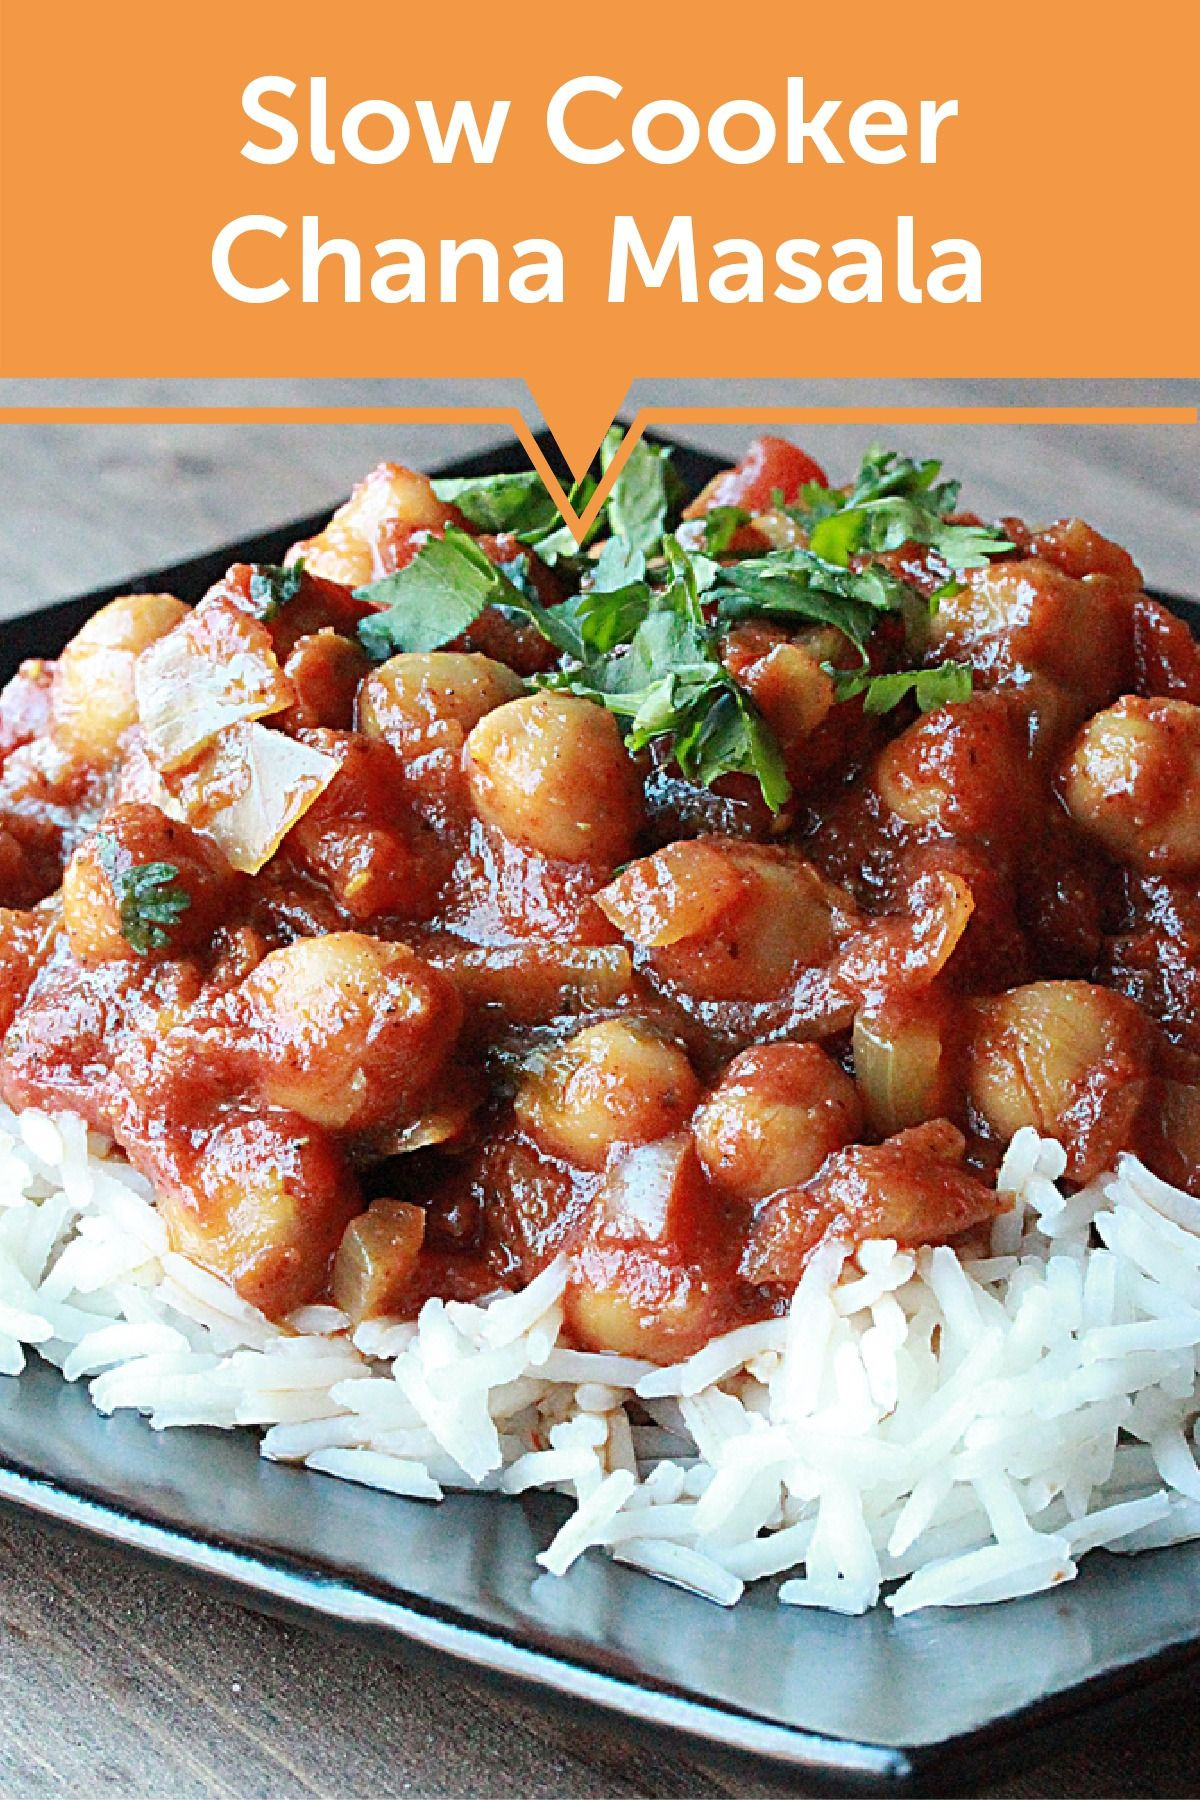 Slow Cooker Indian Vegetarian Recipes
 Chana Masala in the Slow Cooker Recipe